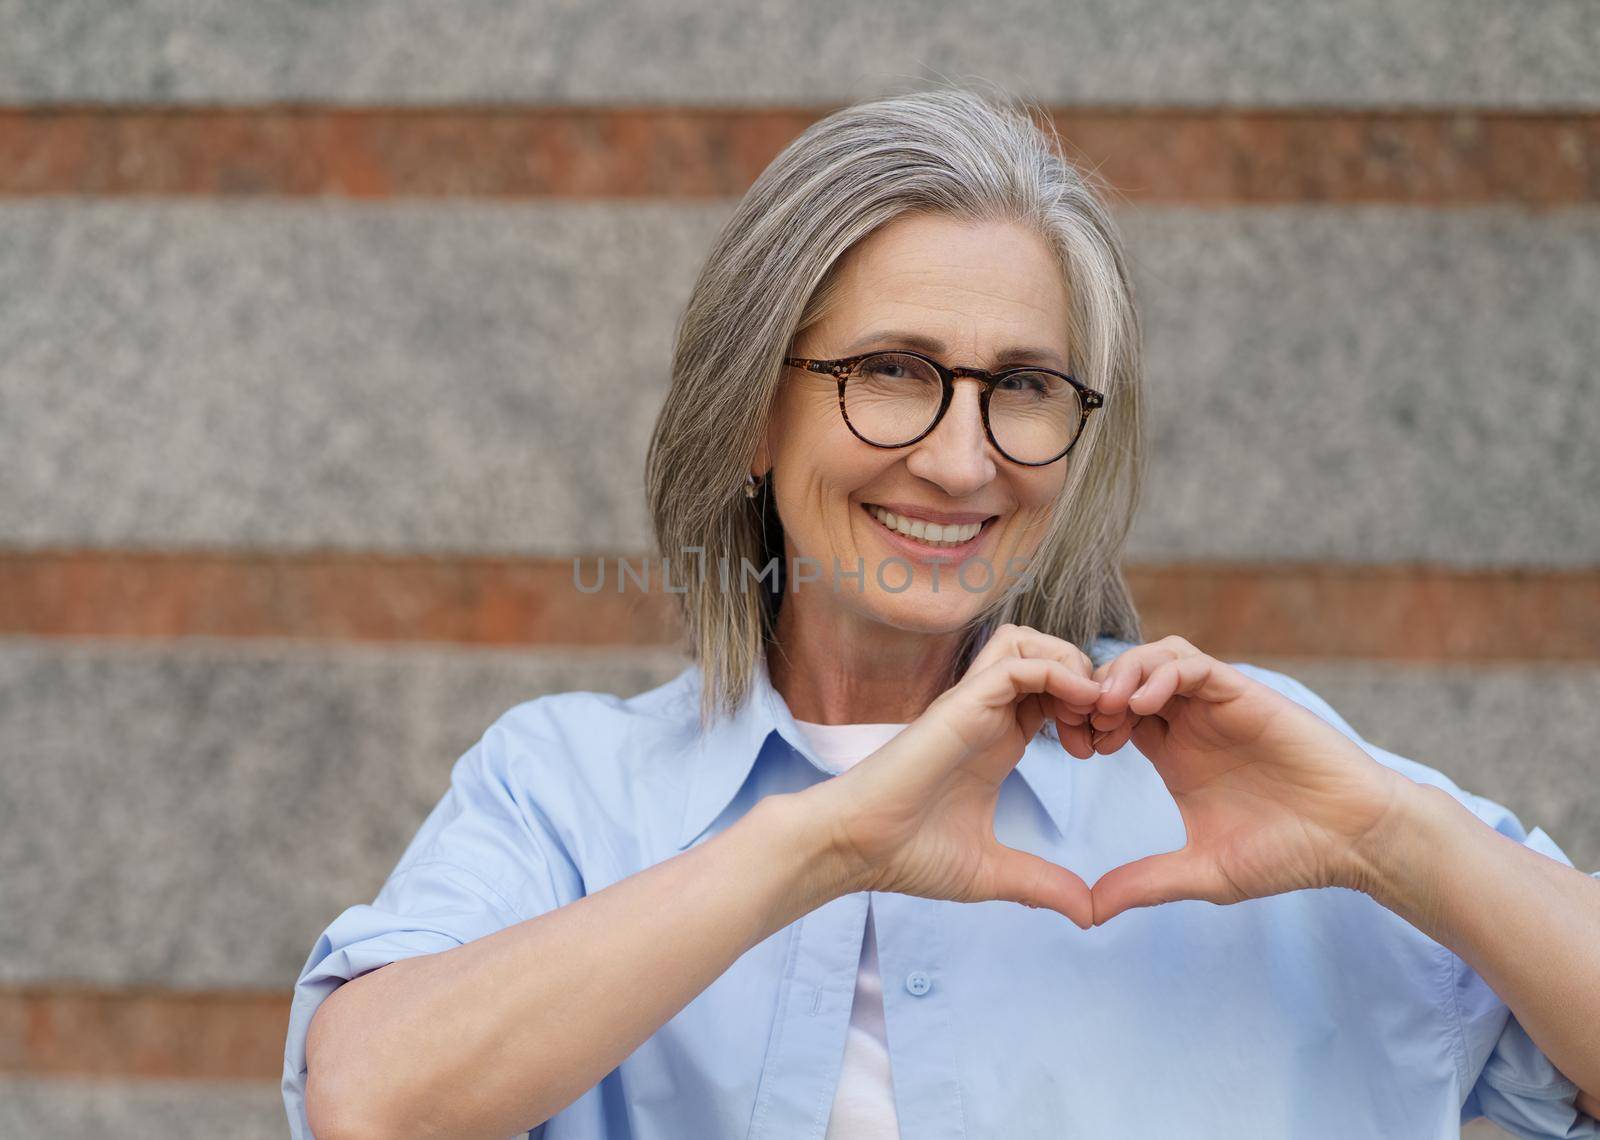 Portrait of attractive mature woman with grey hair showing heart sign gesturing with her hands and smile looking at camera wearing blue casual shirt outdoors. Mature people beauty and care concept.